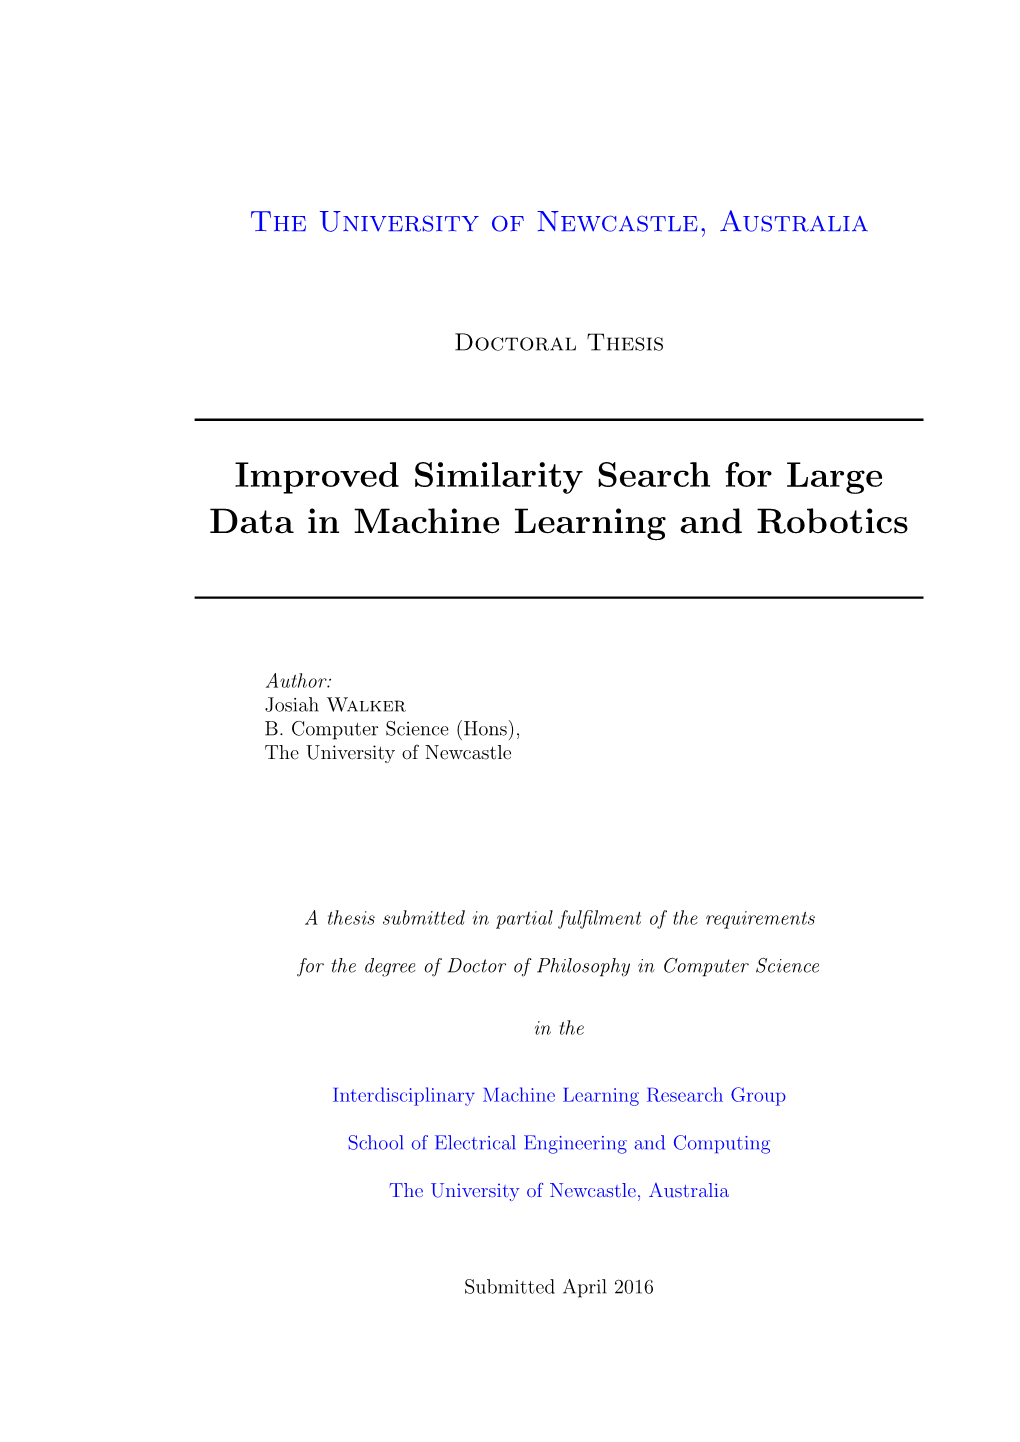 Improved Similarity Search for Large Data in Machine Learning and Robotics